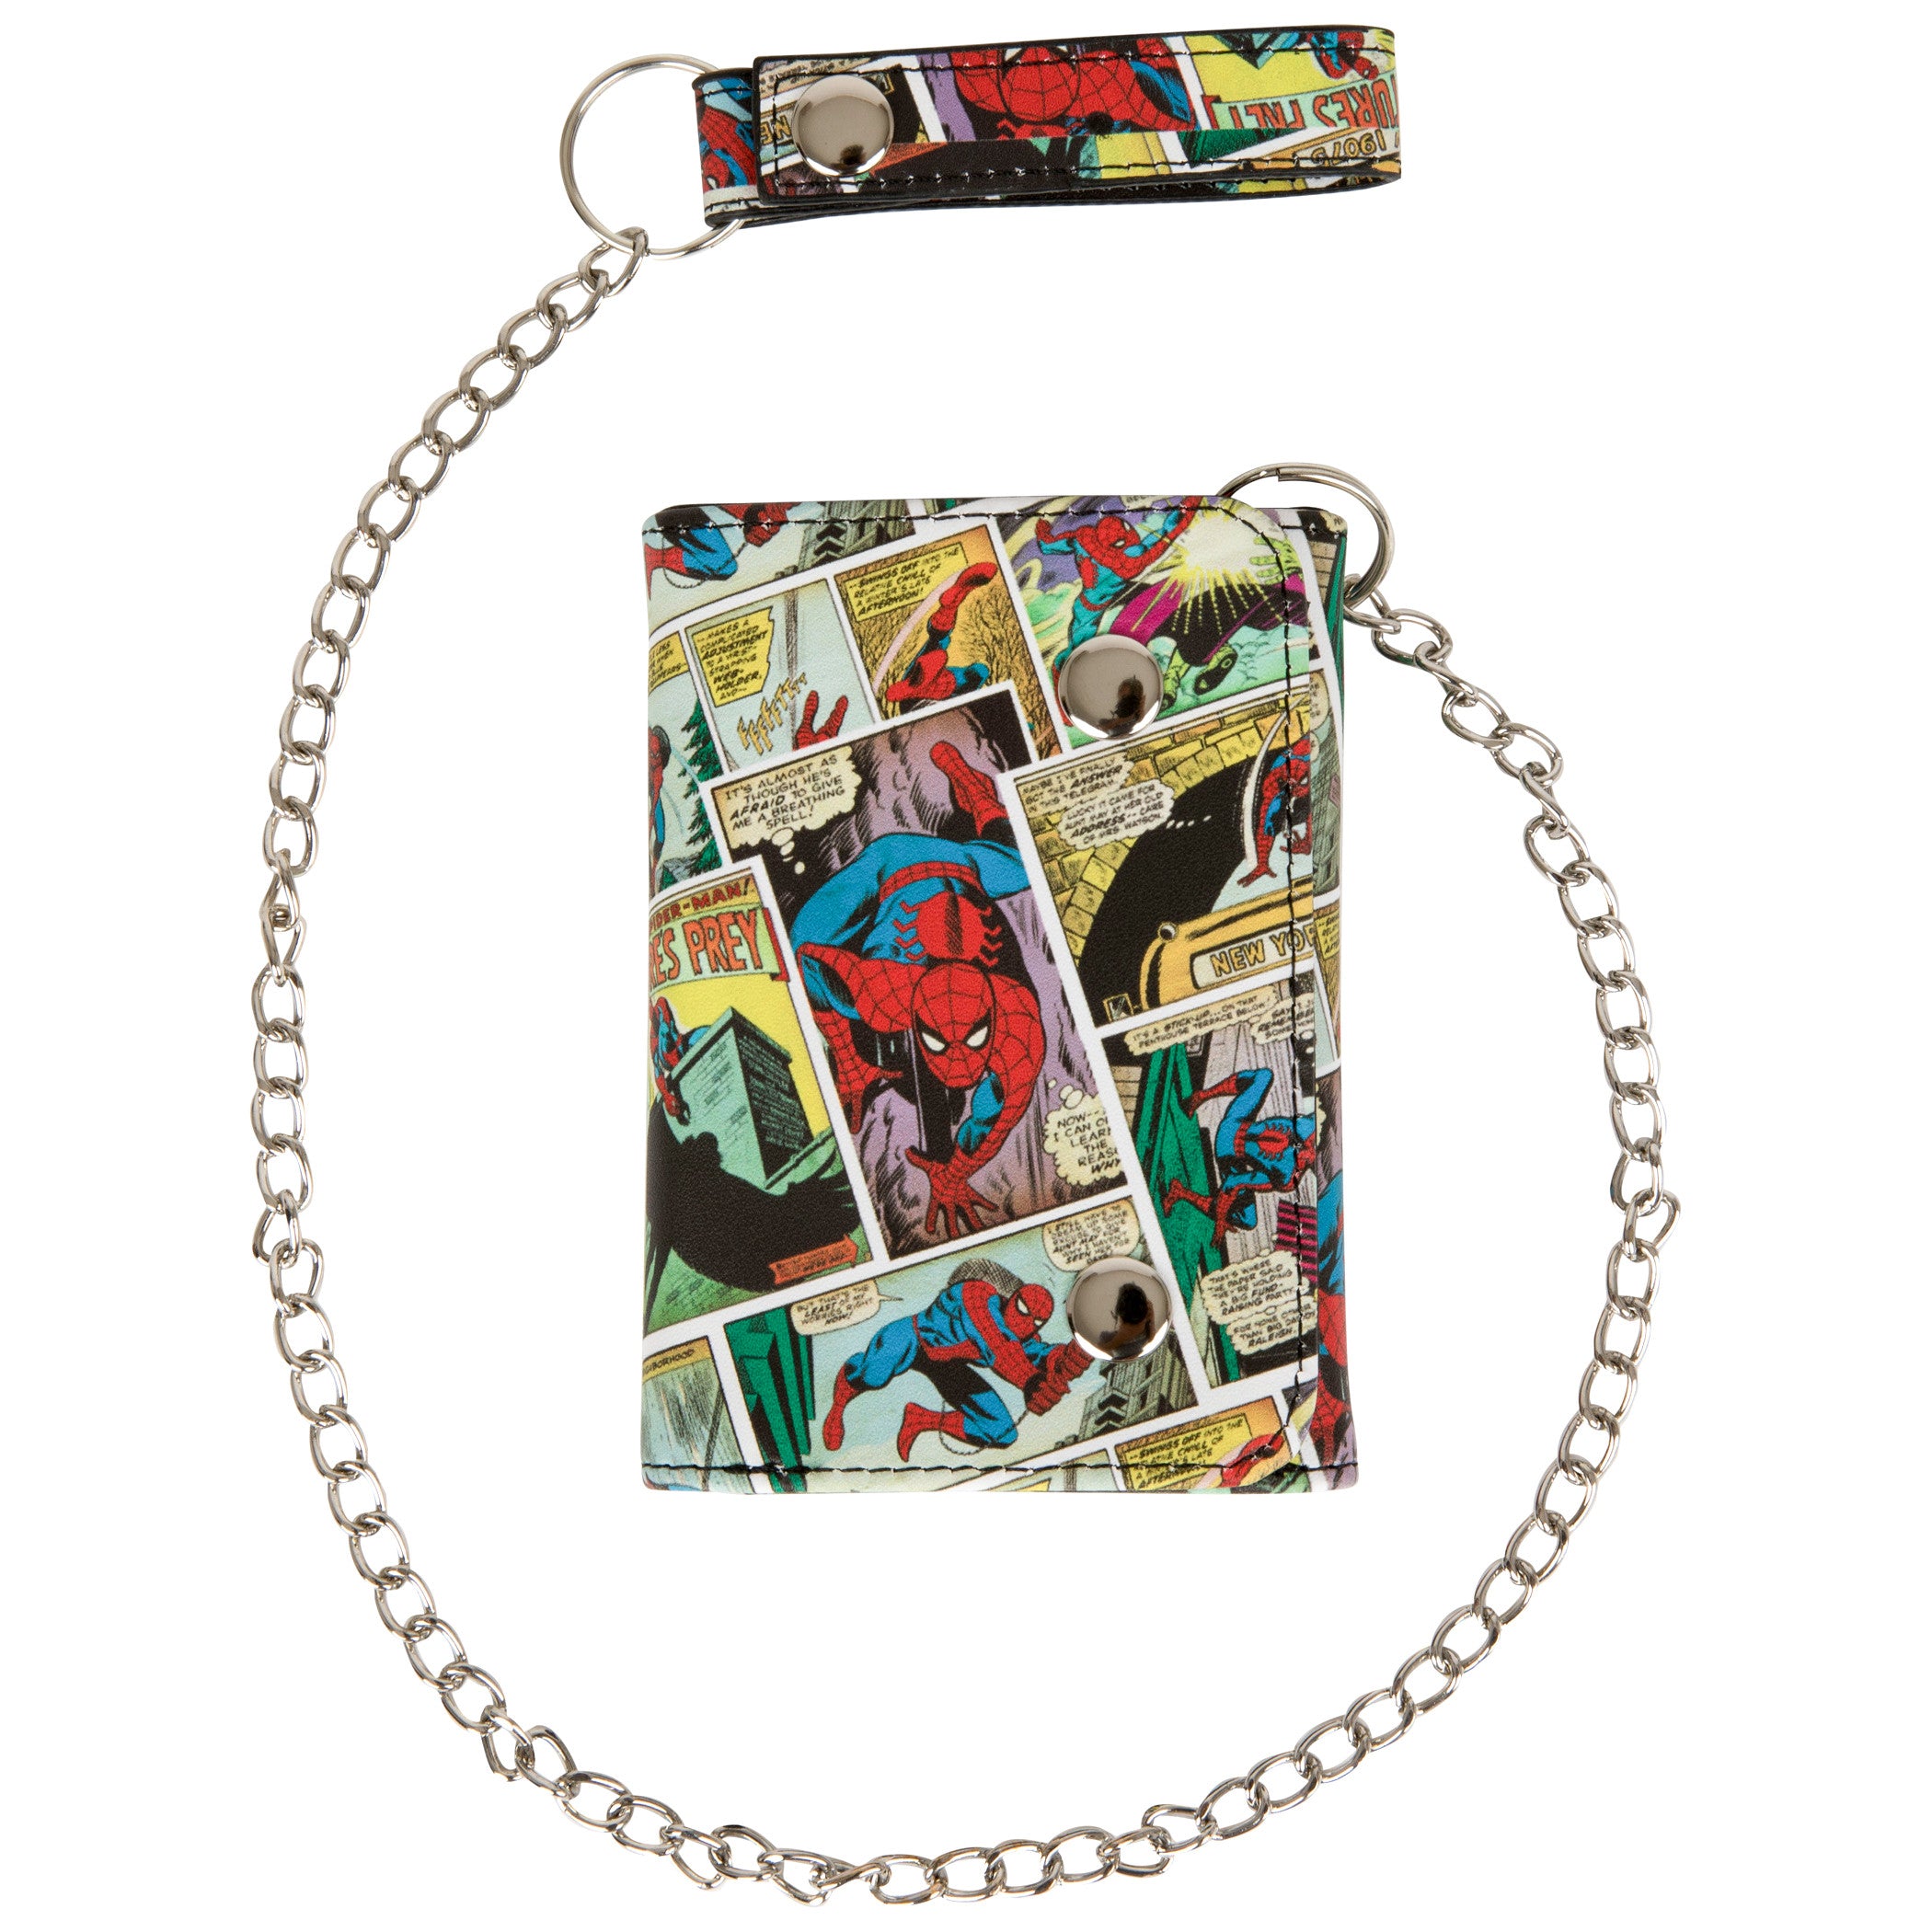 Spider-Man Greatest Comic Covers Collage Chain Wallet